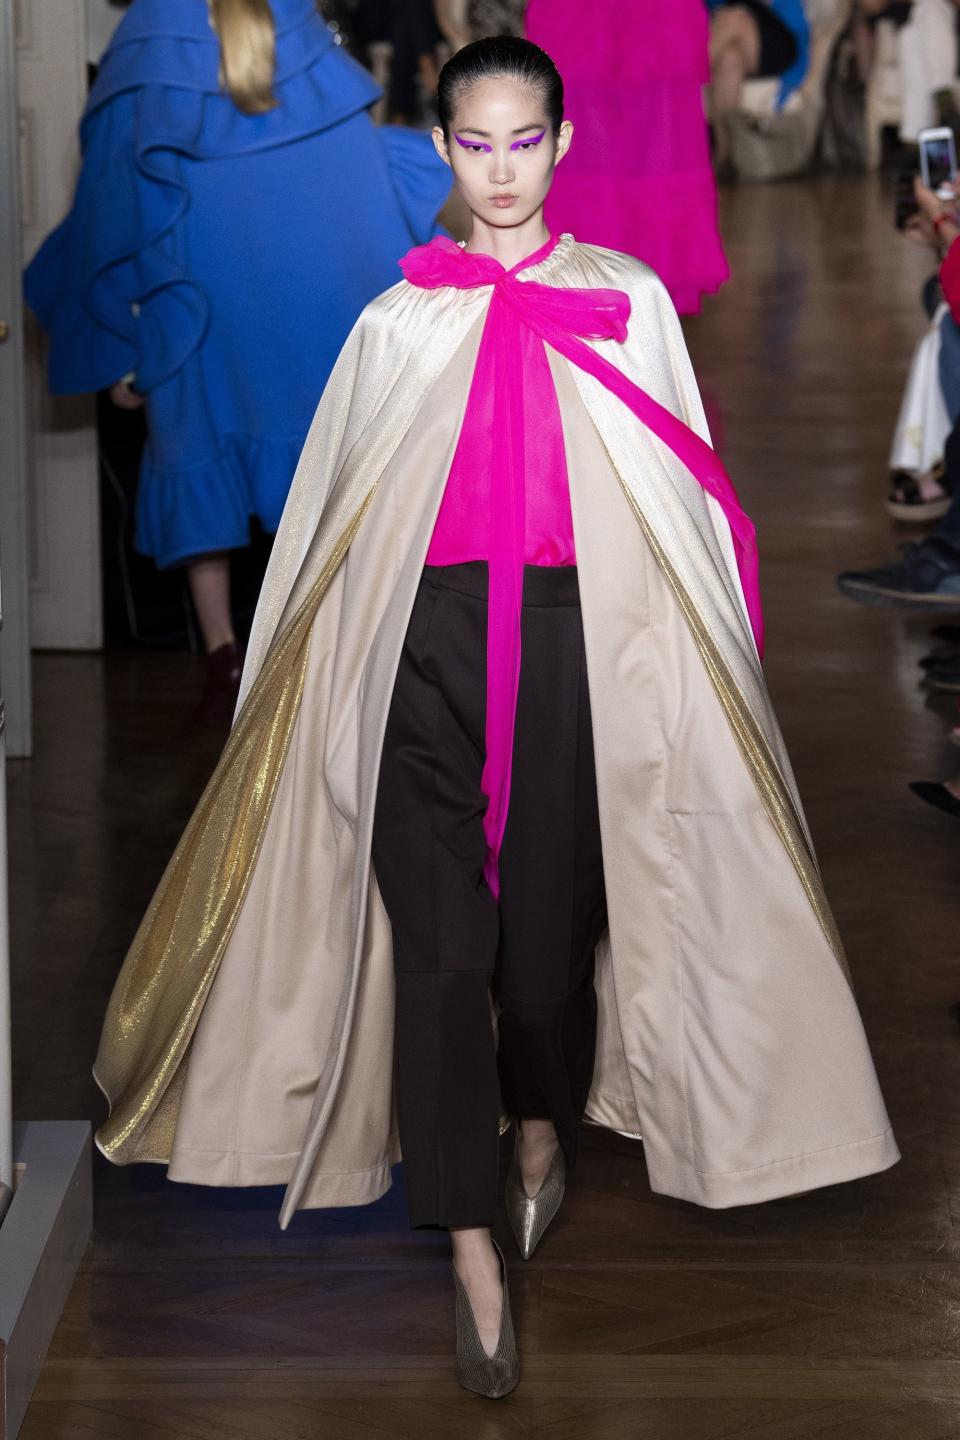 Valentino’s Fall 2018 Couture look, with an elegant bow top and dramatic cape, is worth a red carpet posing session.